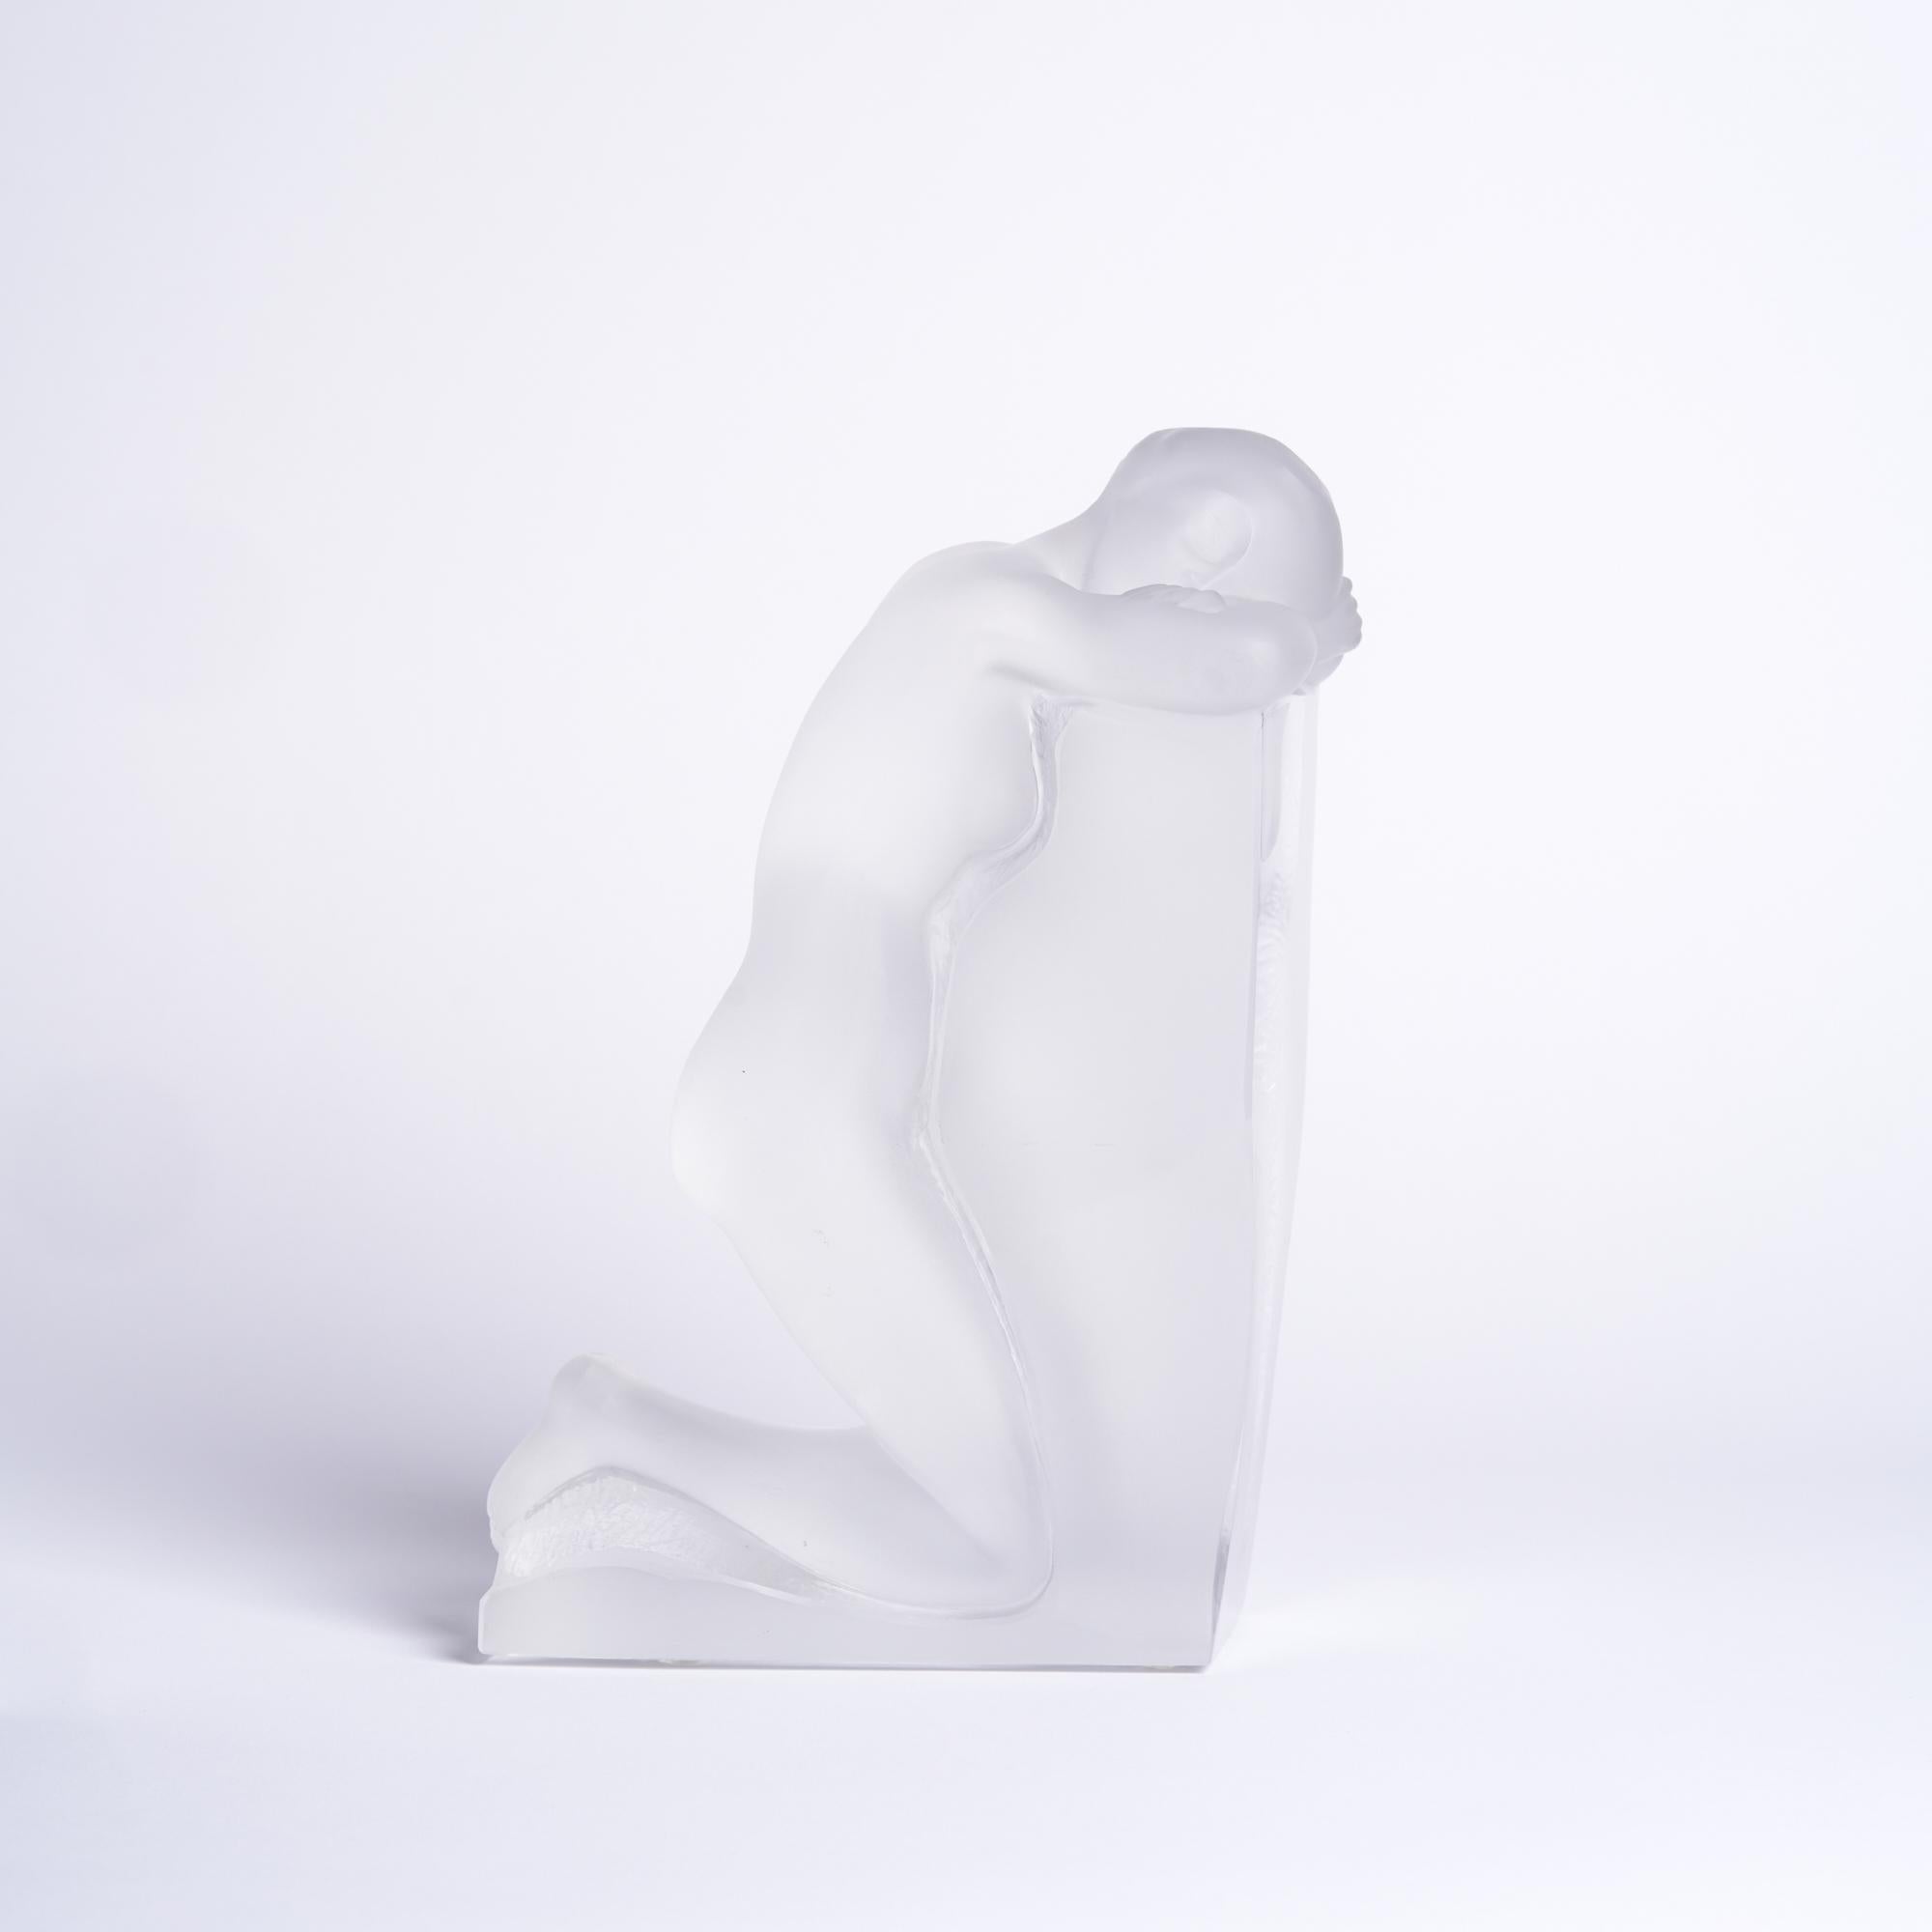 Lalique reverie nude crystal bookend.

This bookend measures: 3.25 wide x 5.5 deep x 3.75 inches high.

Great vintage condition.

We take our photos in a controlled lighting studio to show as much detail as possible. We do not photoshop out